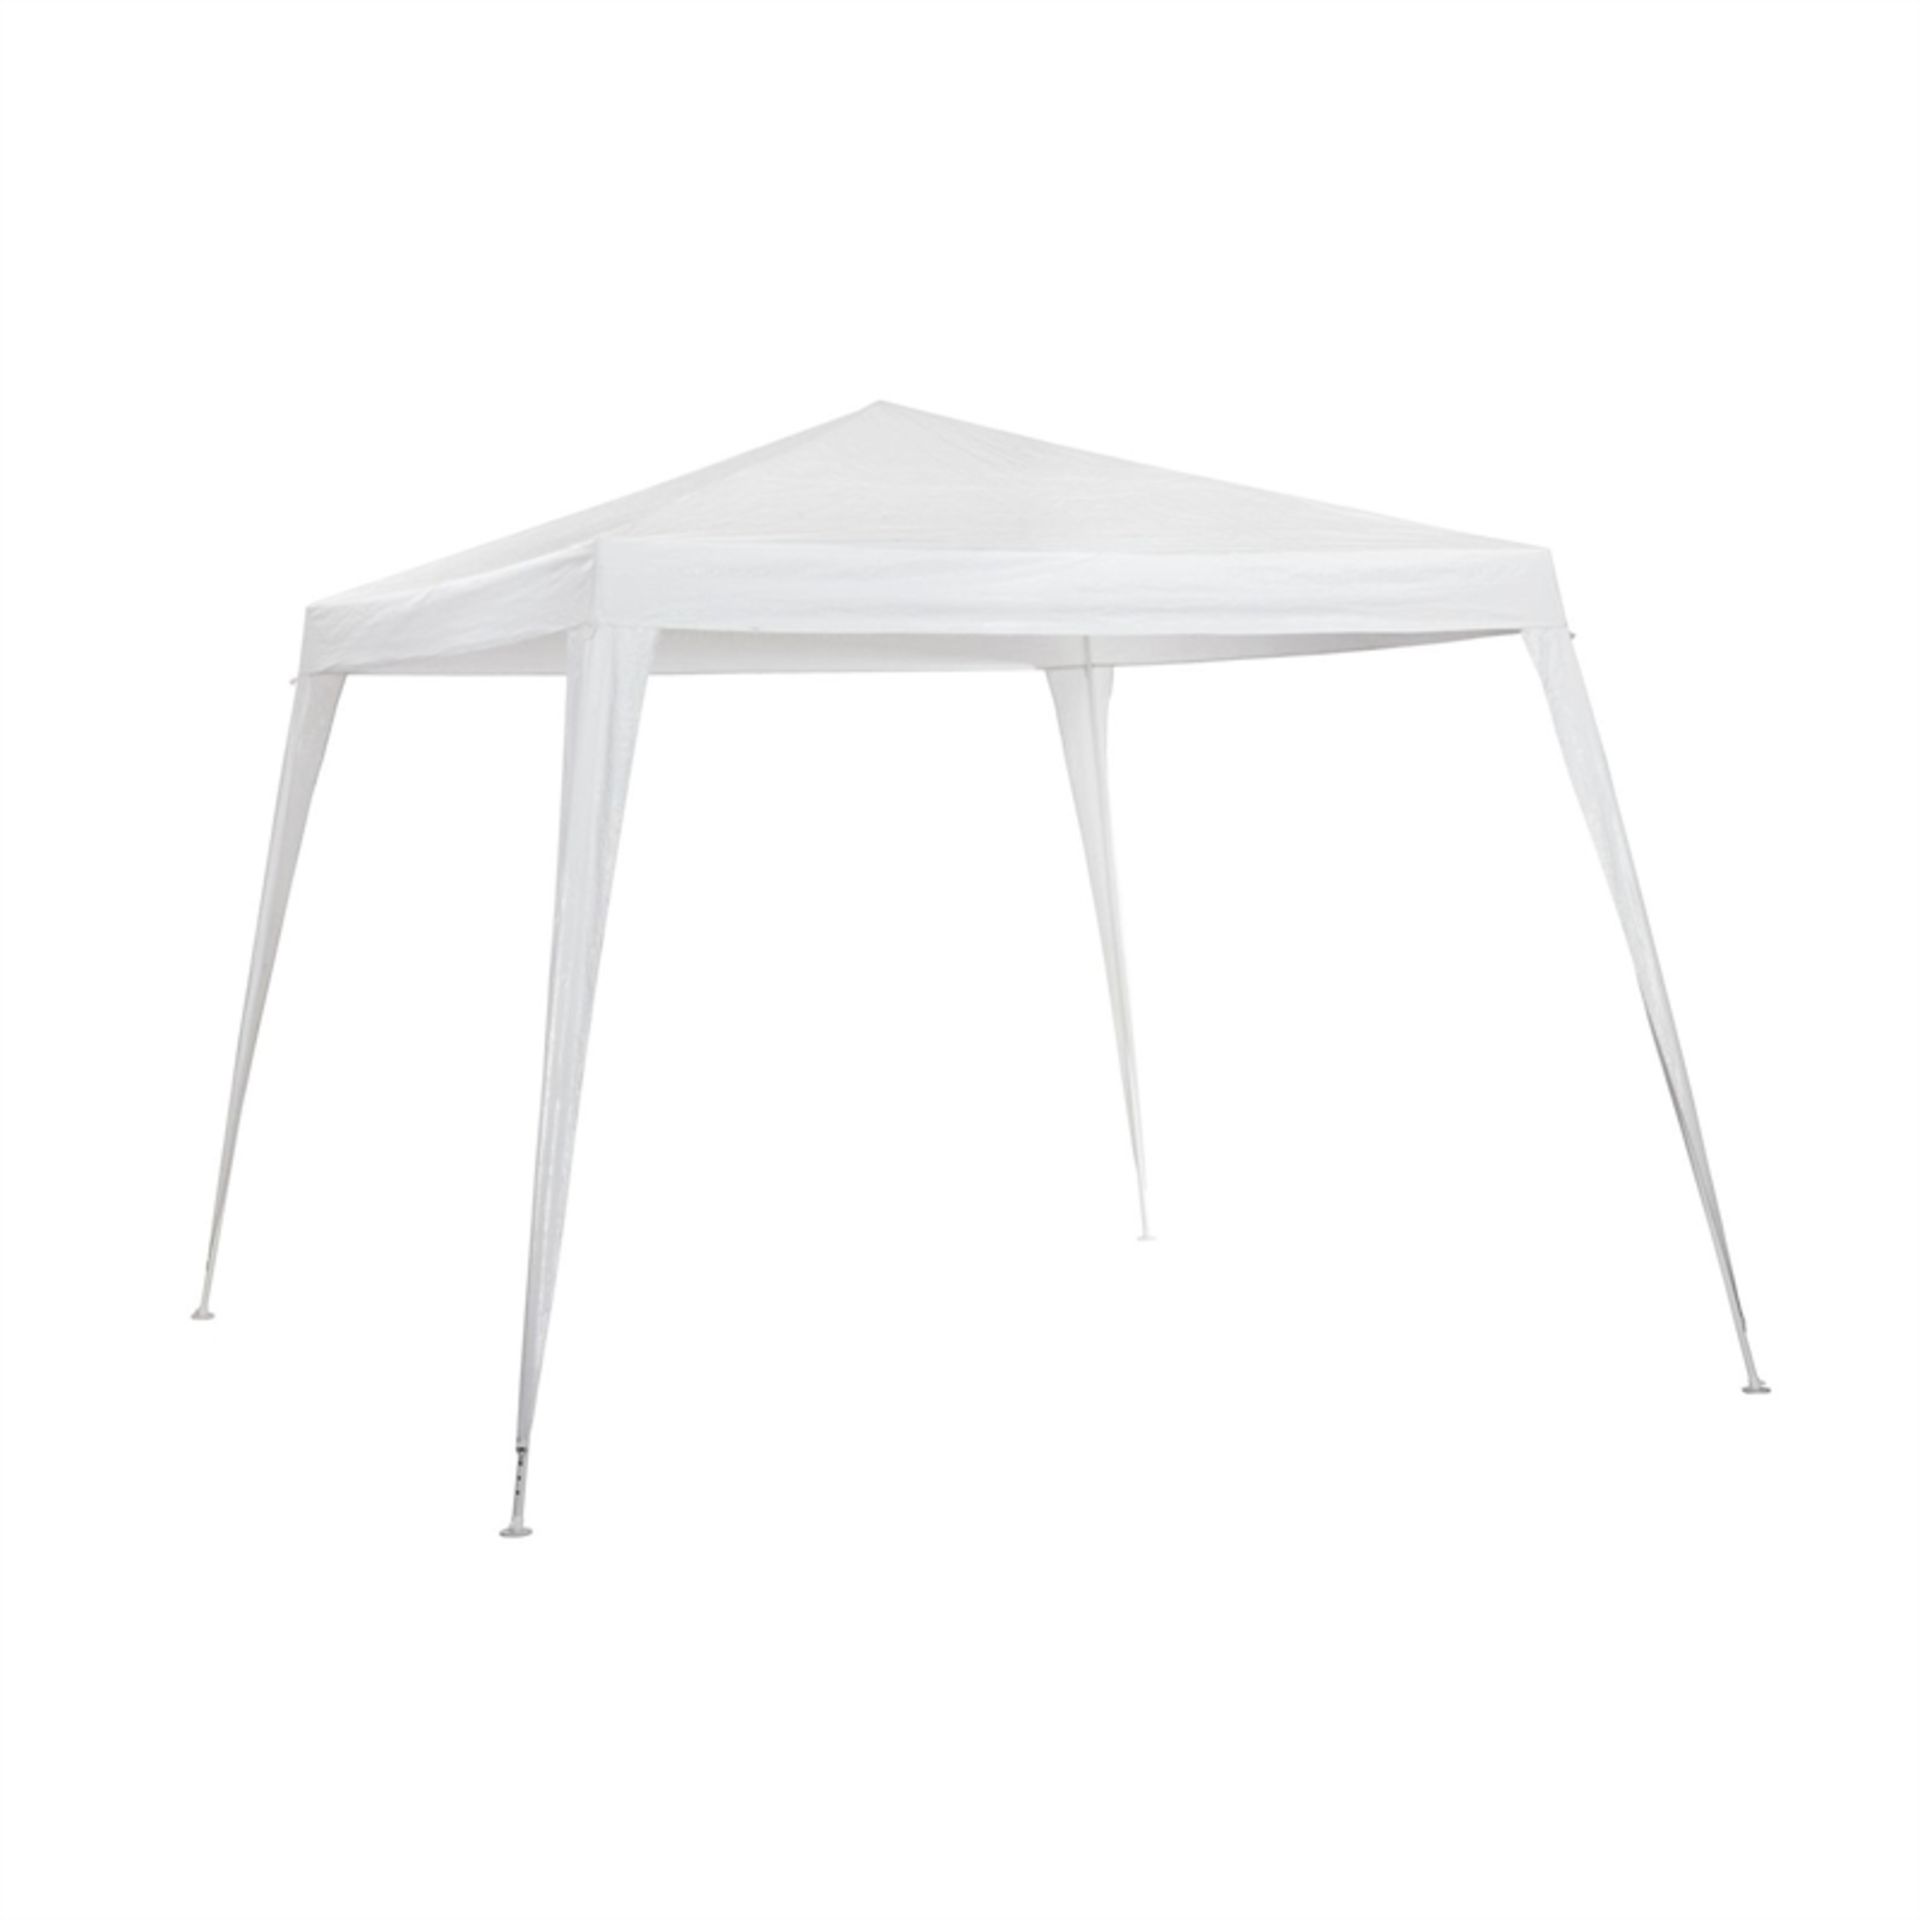 V Brand New 3x3m Gazebo - White - Similar To Picture - Available Five Days After Payments